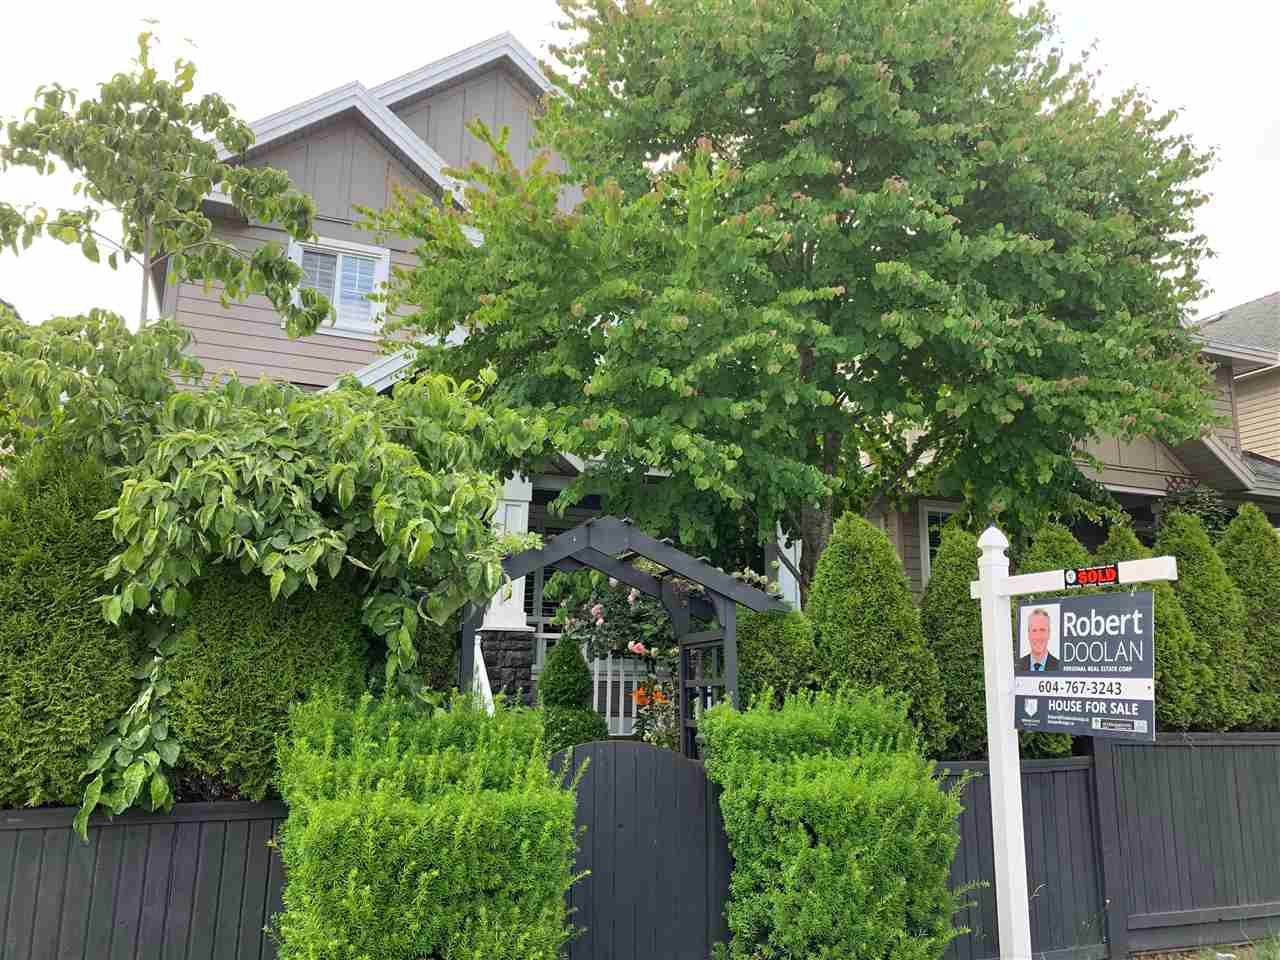 Open House. Open House on Sunday, April 14, 2019 1:00PM - 3:00PM
Access and parking in back lane from 29A Ave. Pilar Osing 604-619-6408 is holding the open house.